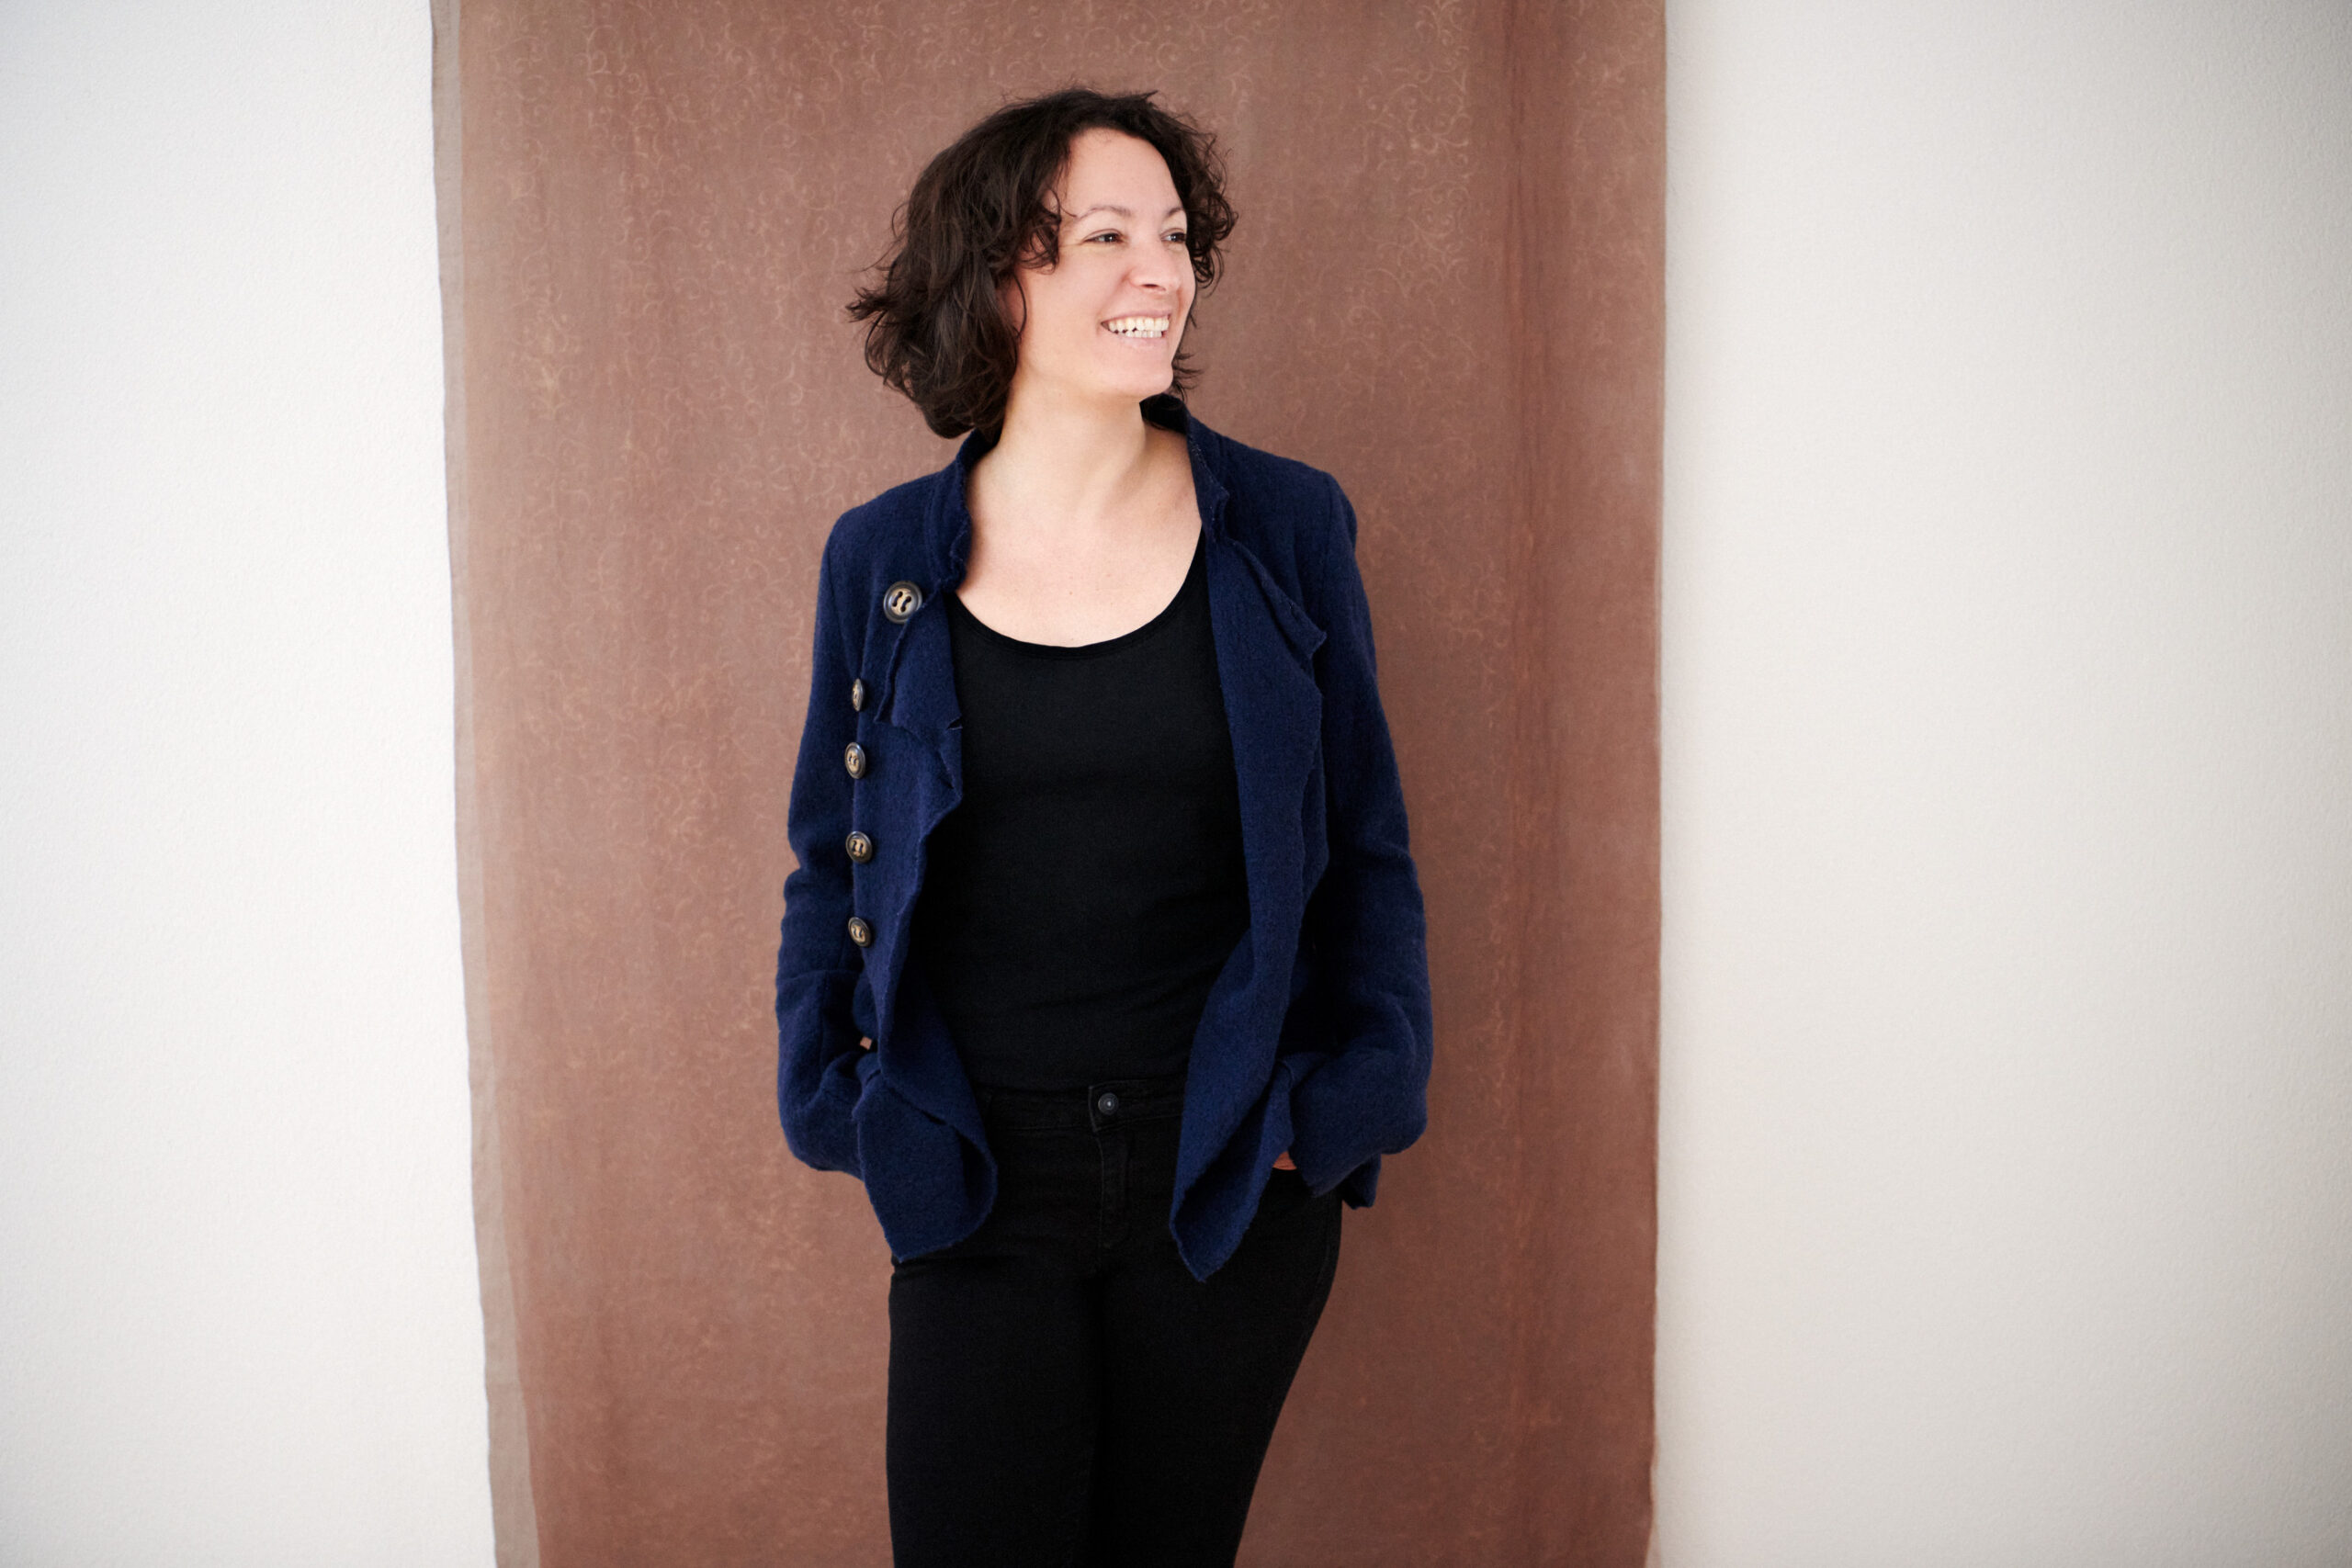 This picture shows Serena Olgiati, co-founder of SPARK